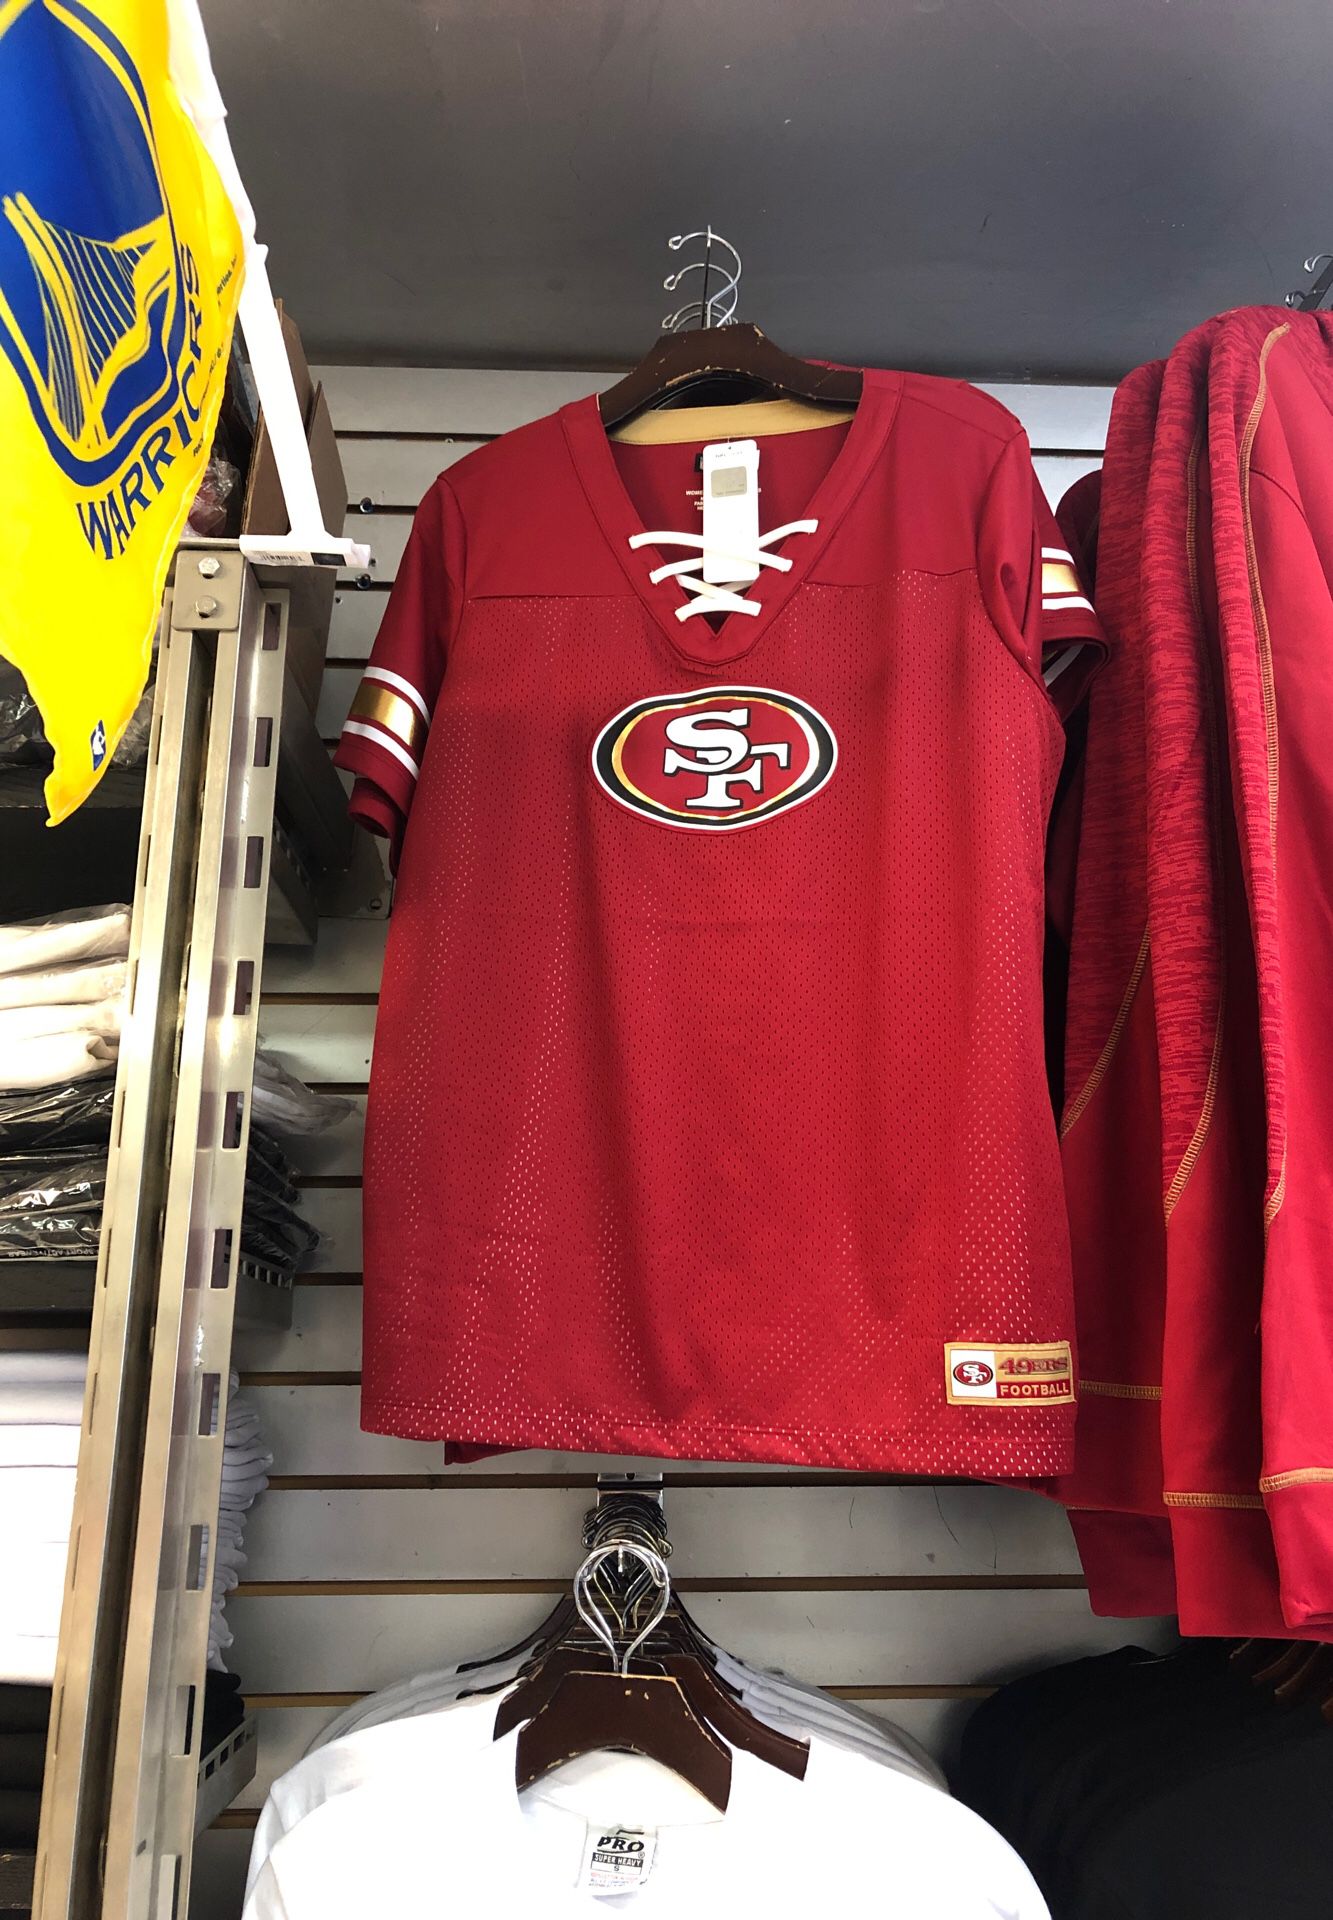 Calgary Flames Jersey for Sale in San Francisco, CA - OfferUp